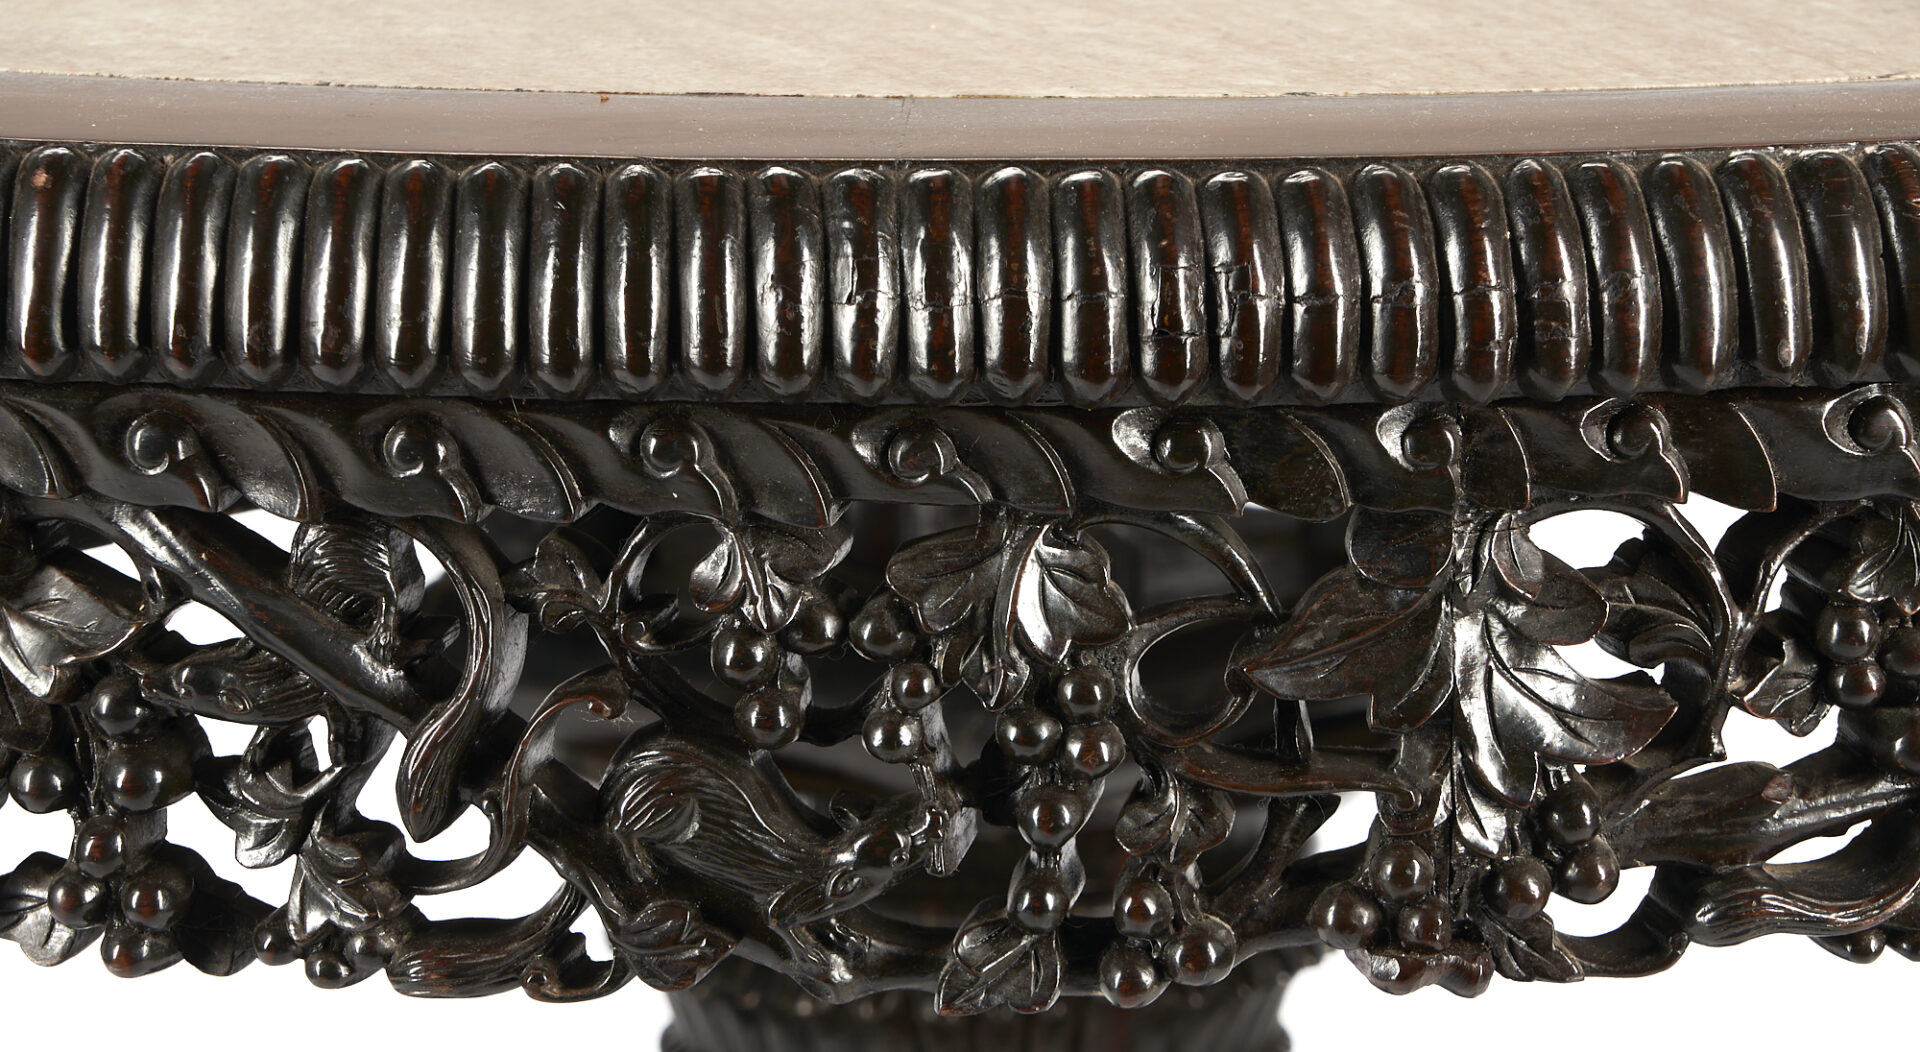 Lot 24: 19th C. Figural Carved Center Table with Marble Top, Dogs, Birdcage